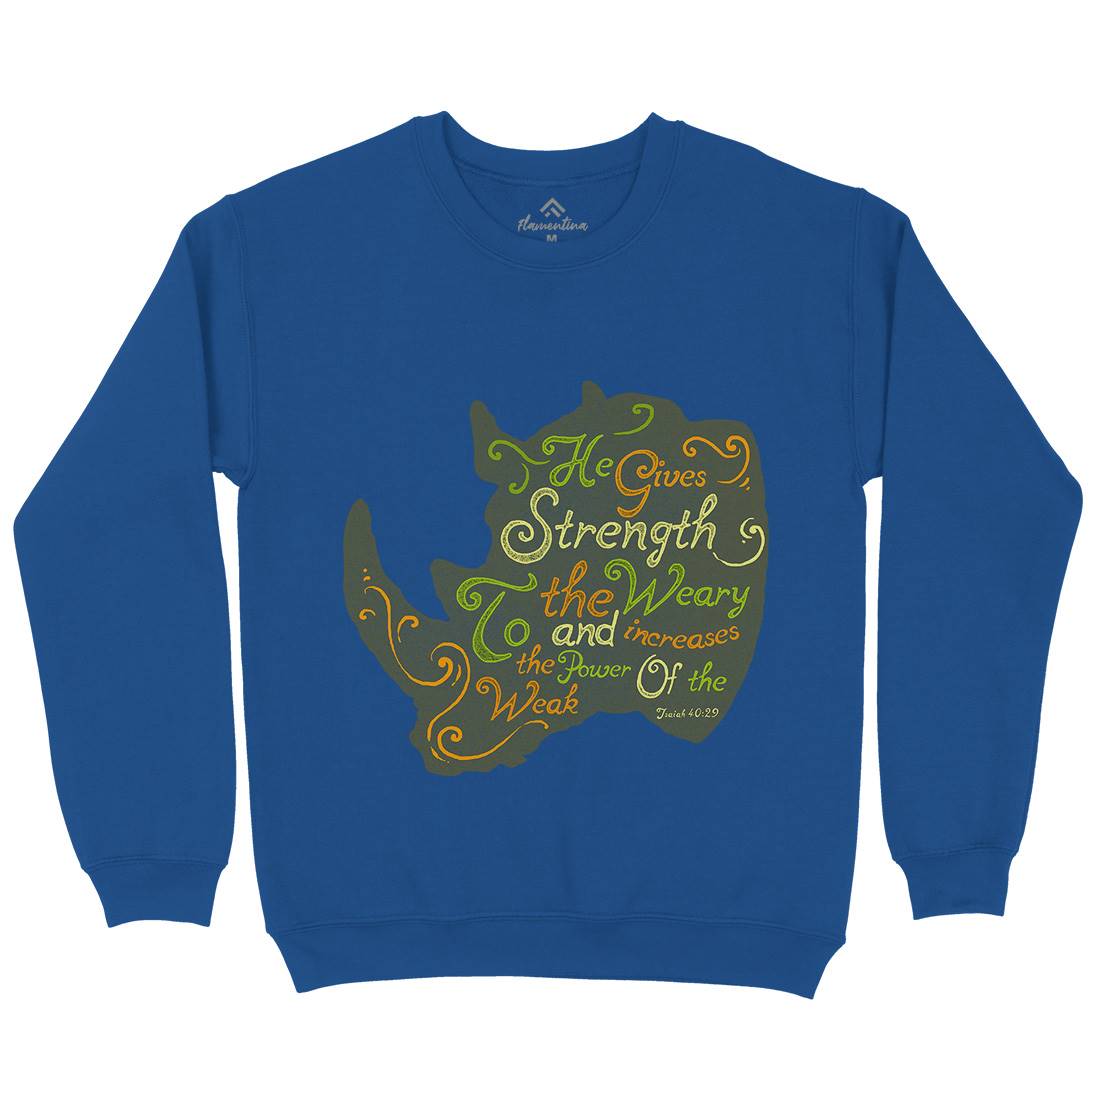 He Gives Strength Kids Crew Neck Sweatshirt Religion A325